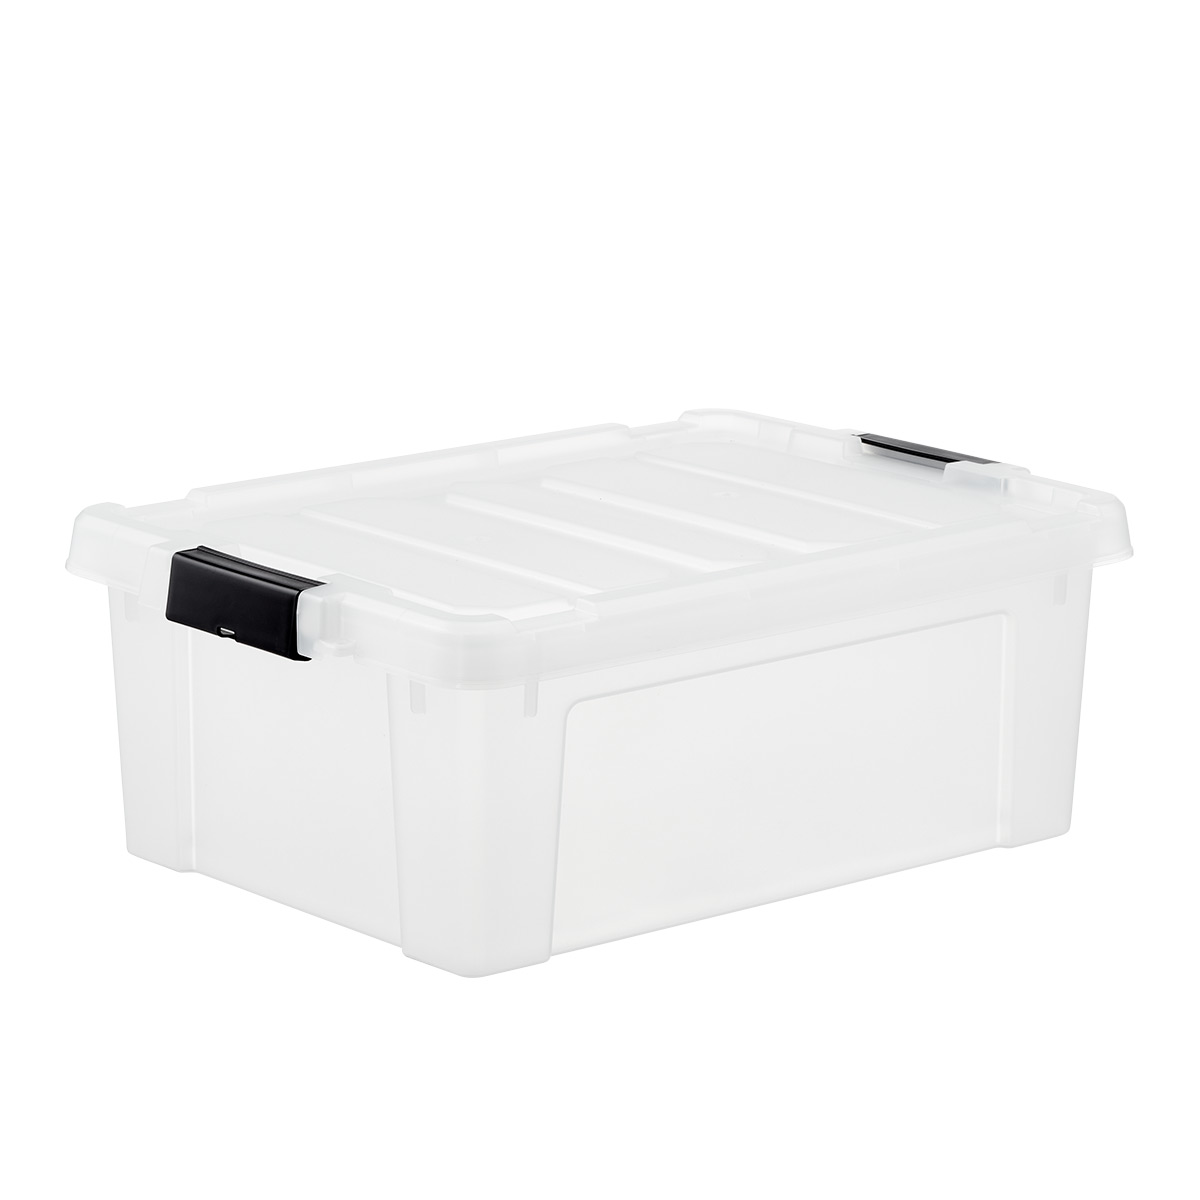 The Container Store 11.75 gal. HeavyDuty Stacking Garage Tote Clear